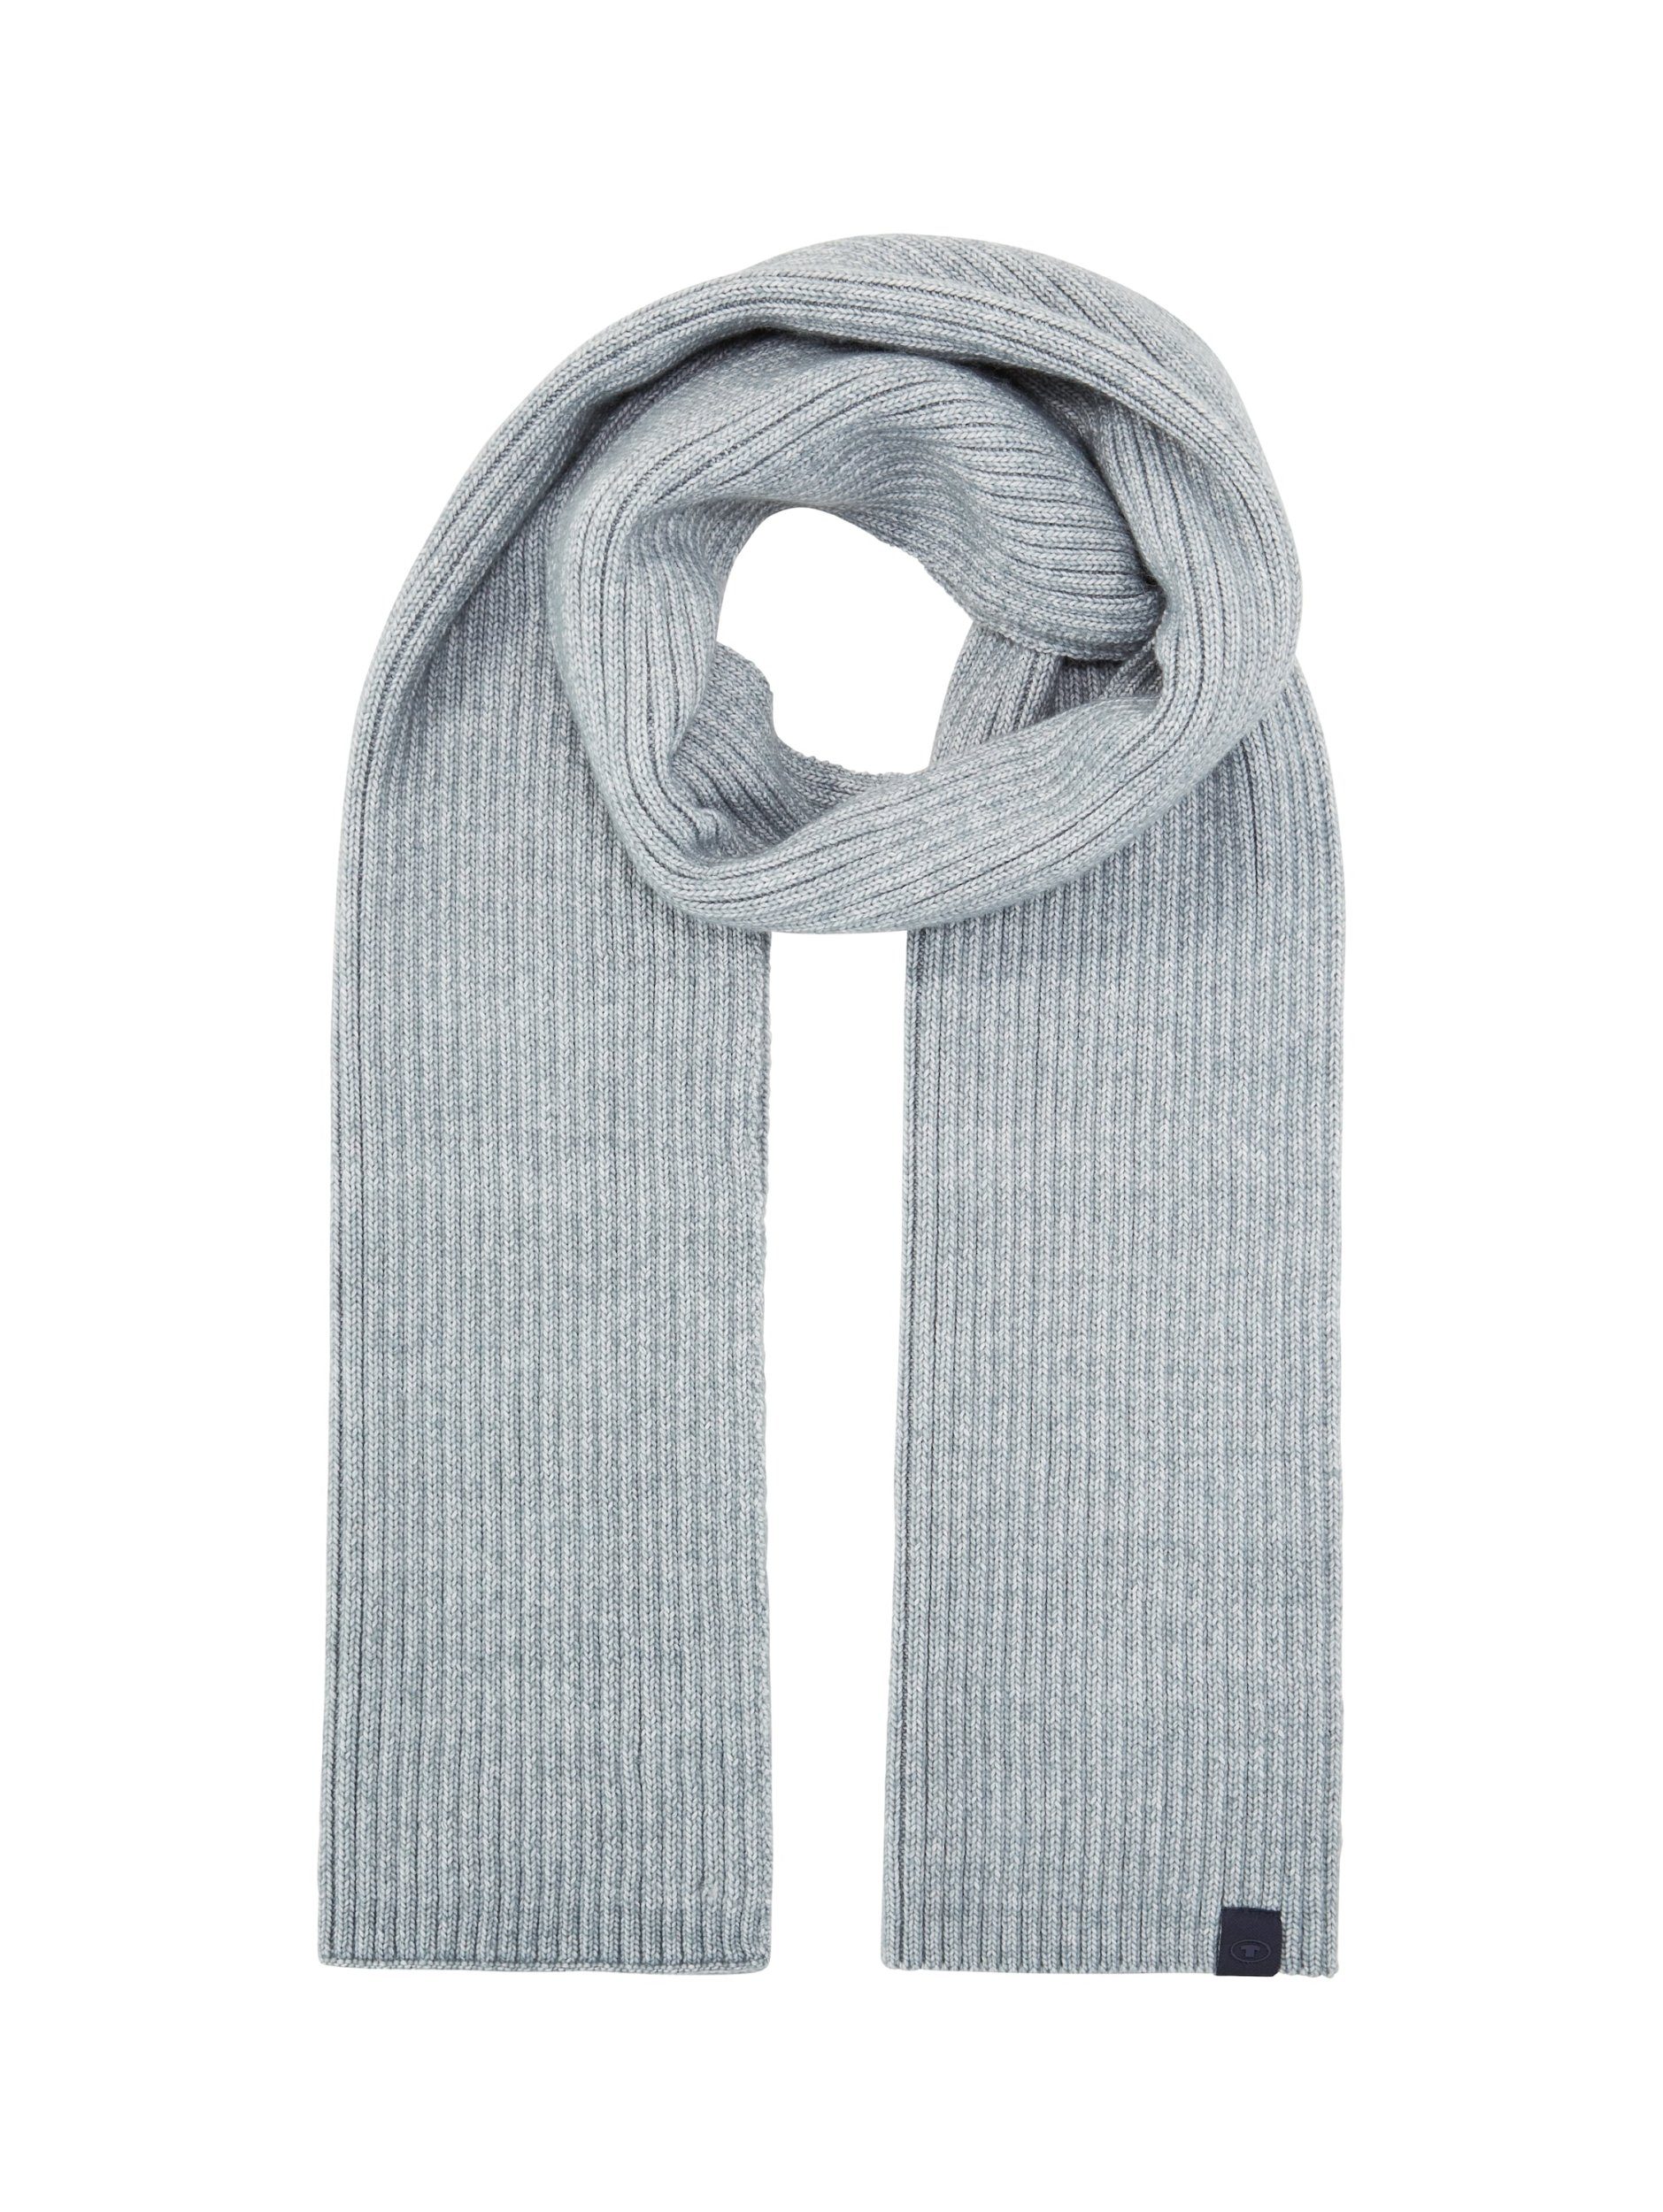 TOM TAILOR Modeschal cosy knitted scarf grey mint